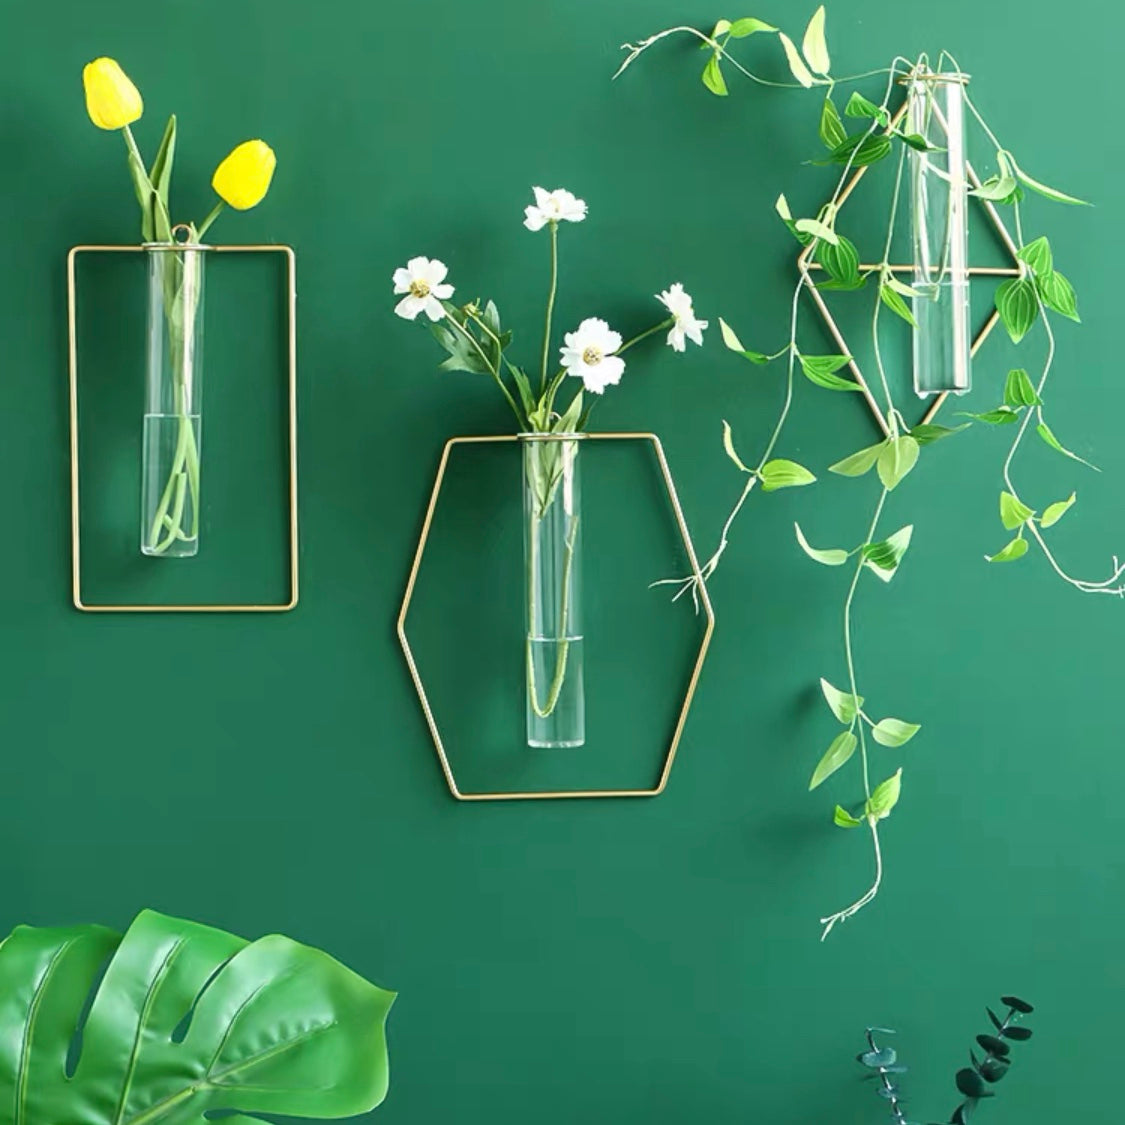 wall wire flower vase | 壁掛けワイヤー花瓶 – Sunny Side Up